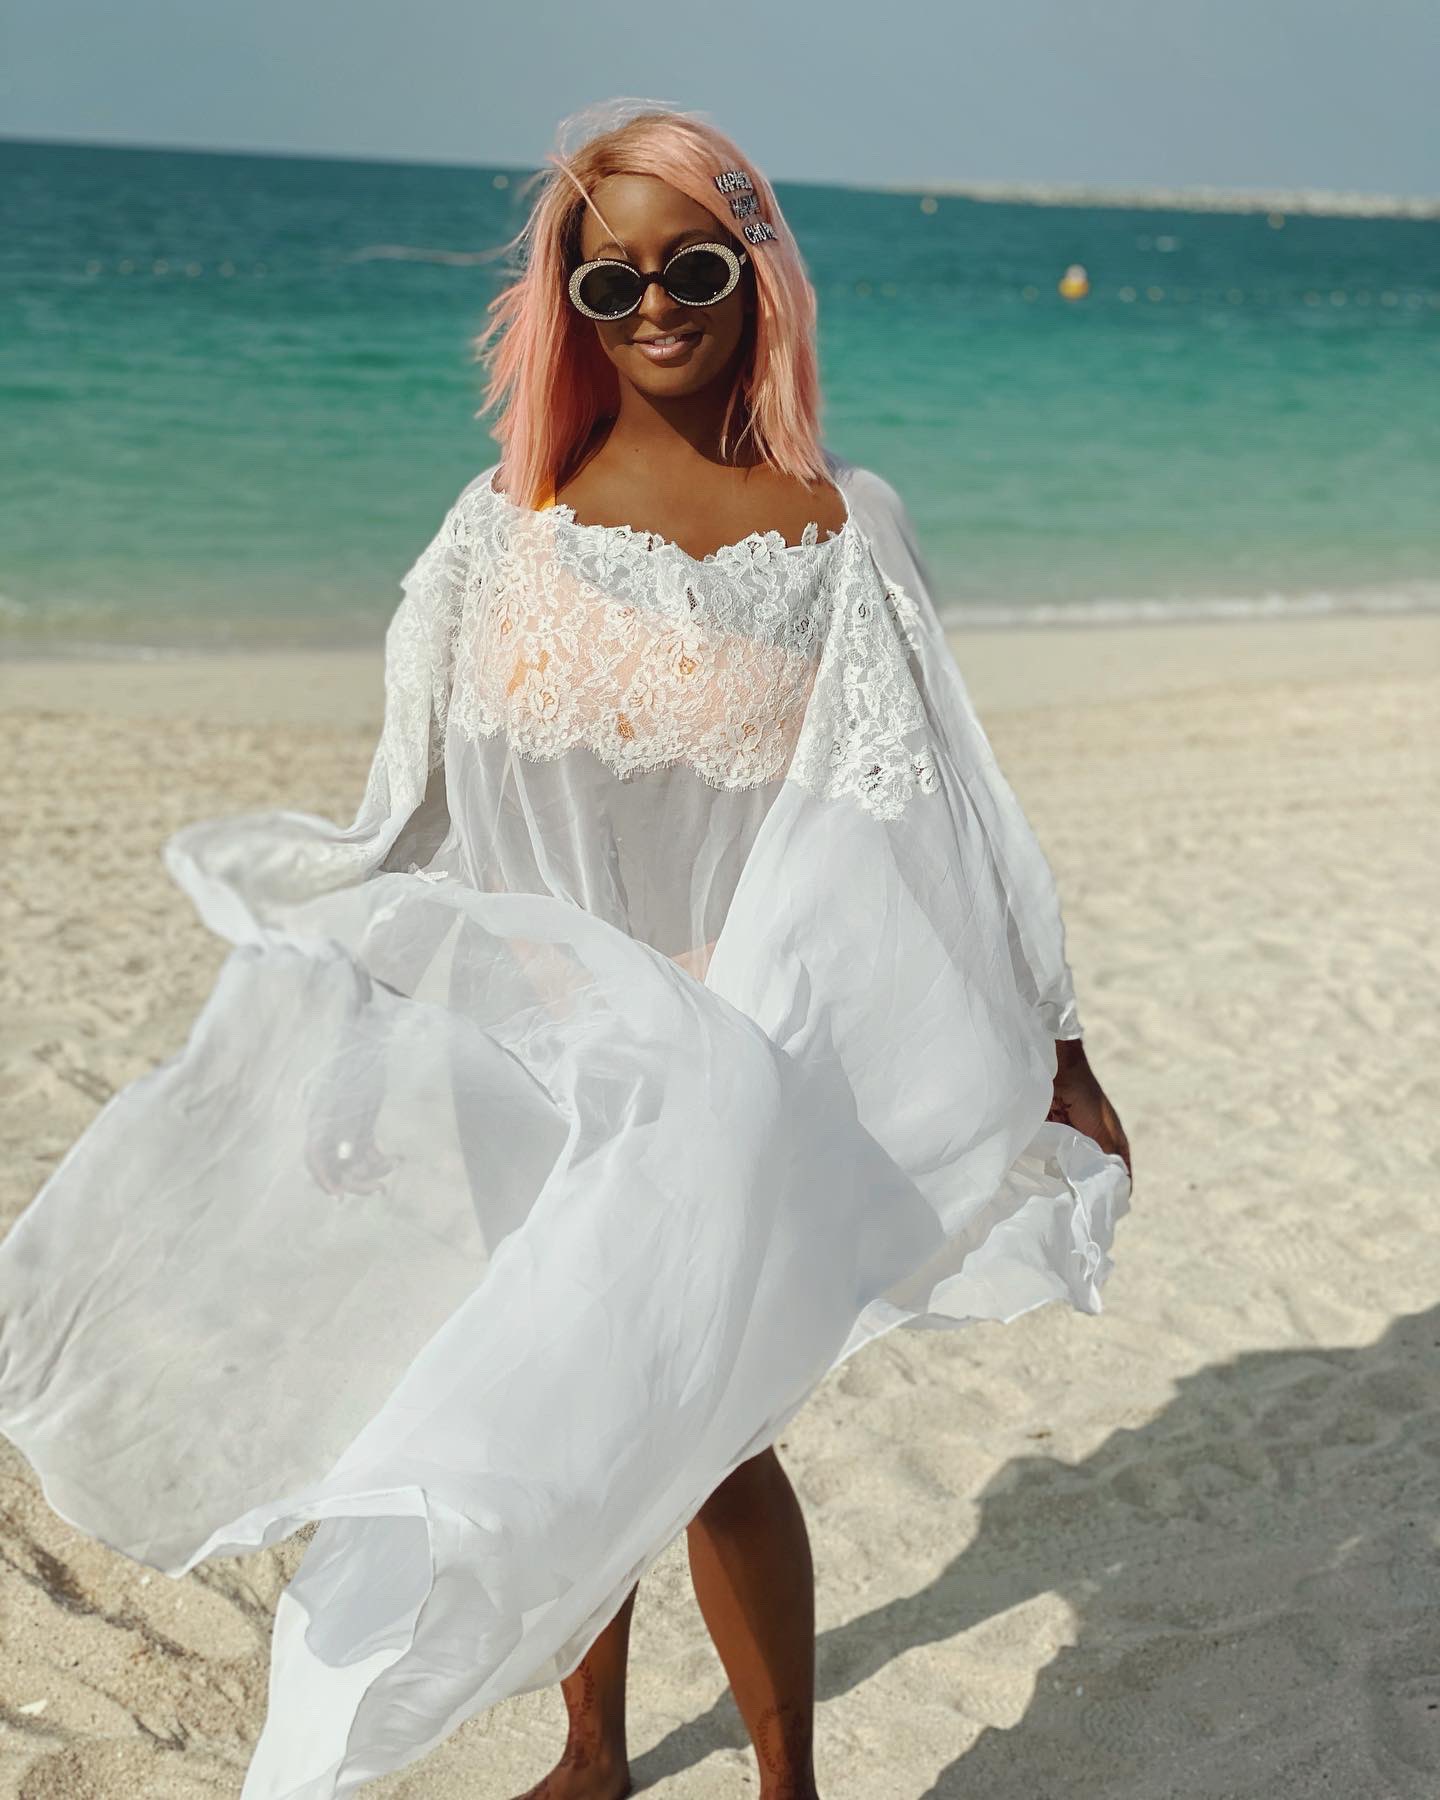 “This is rare” - Fans react as Dj Cuppy exposes her bum in bikini photos